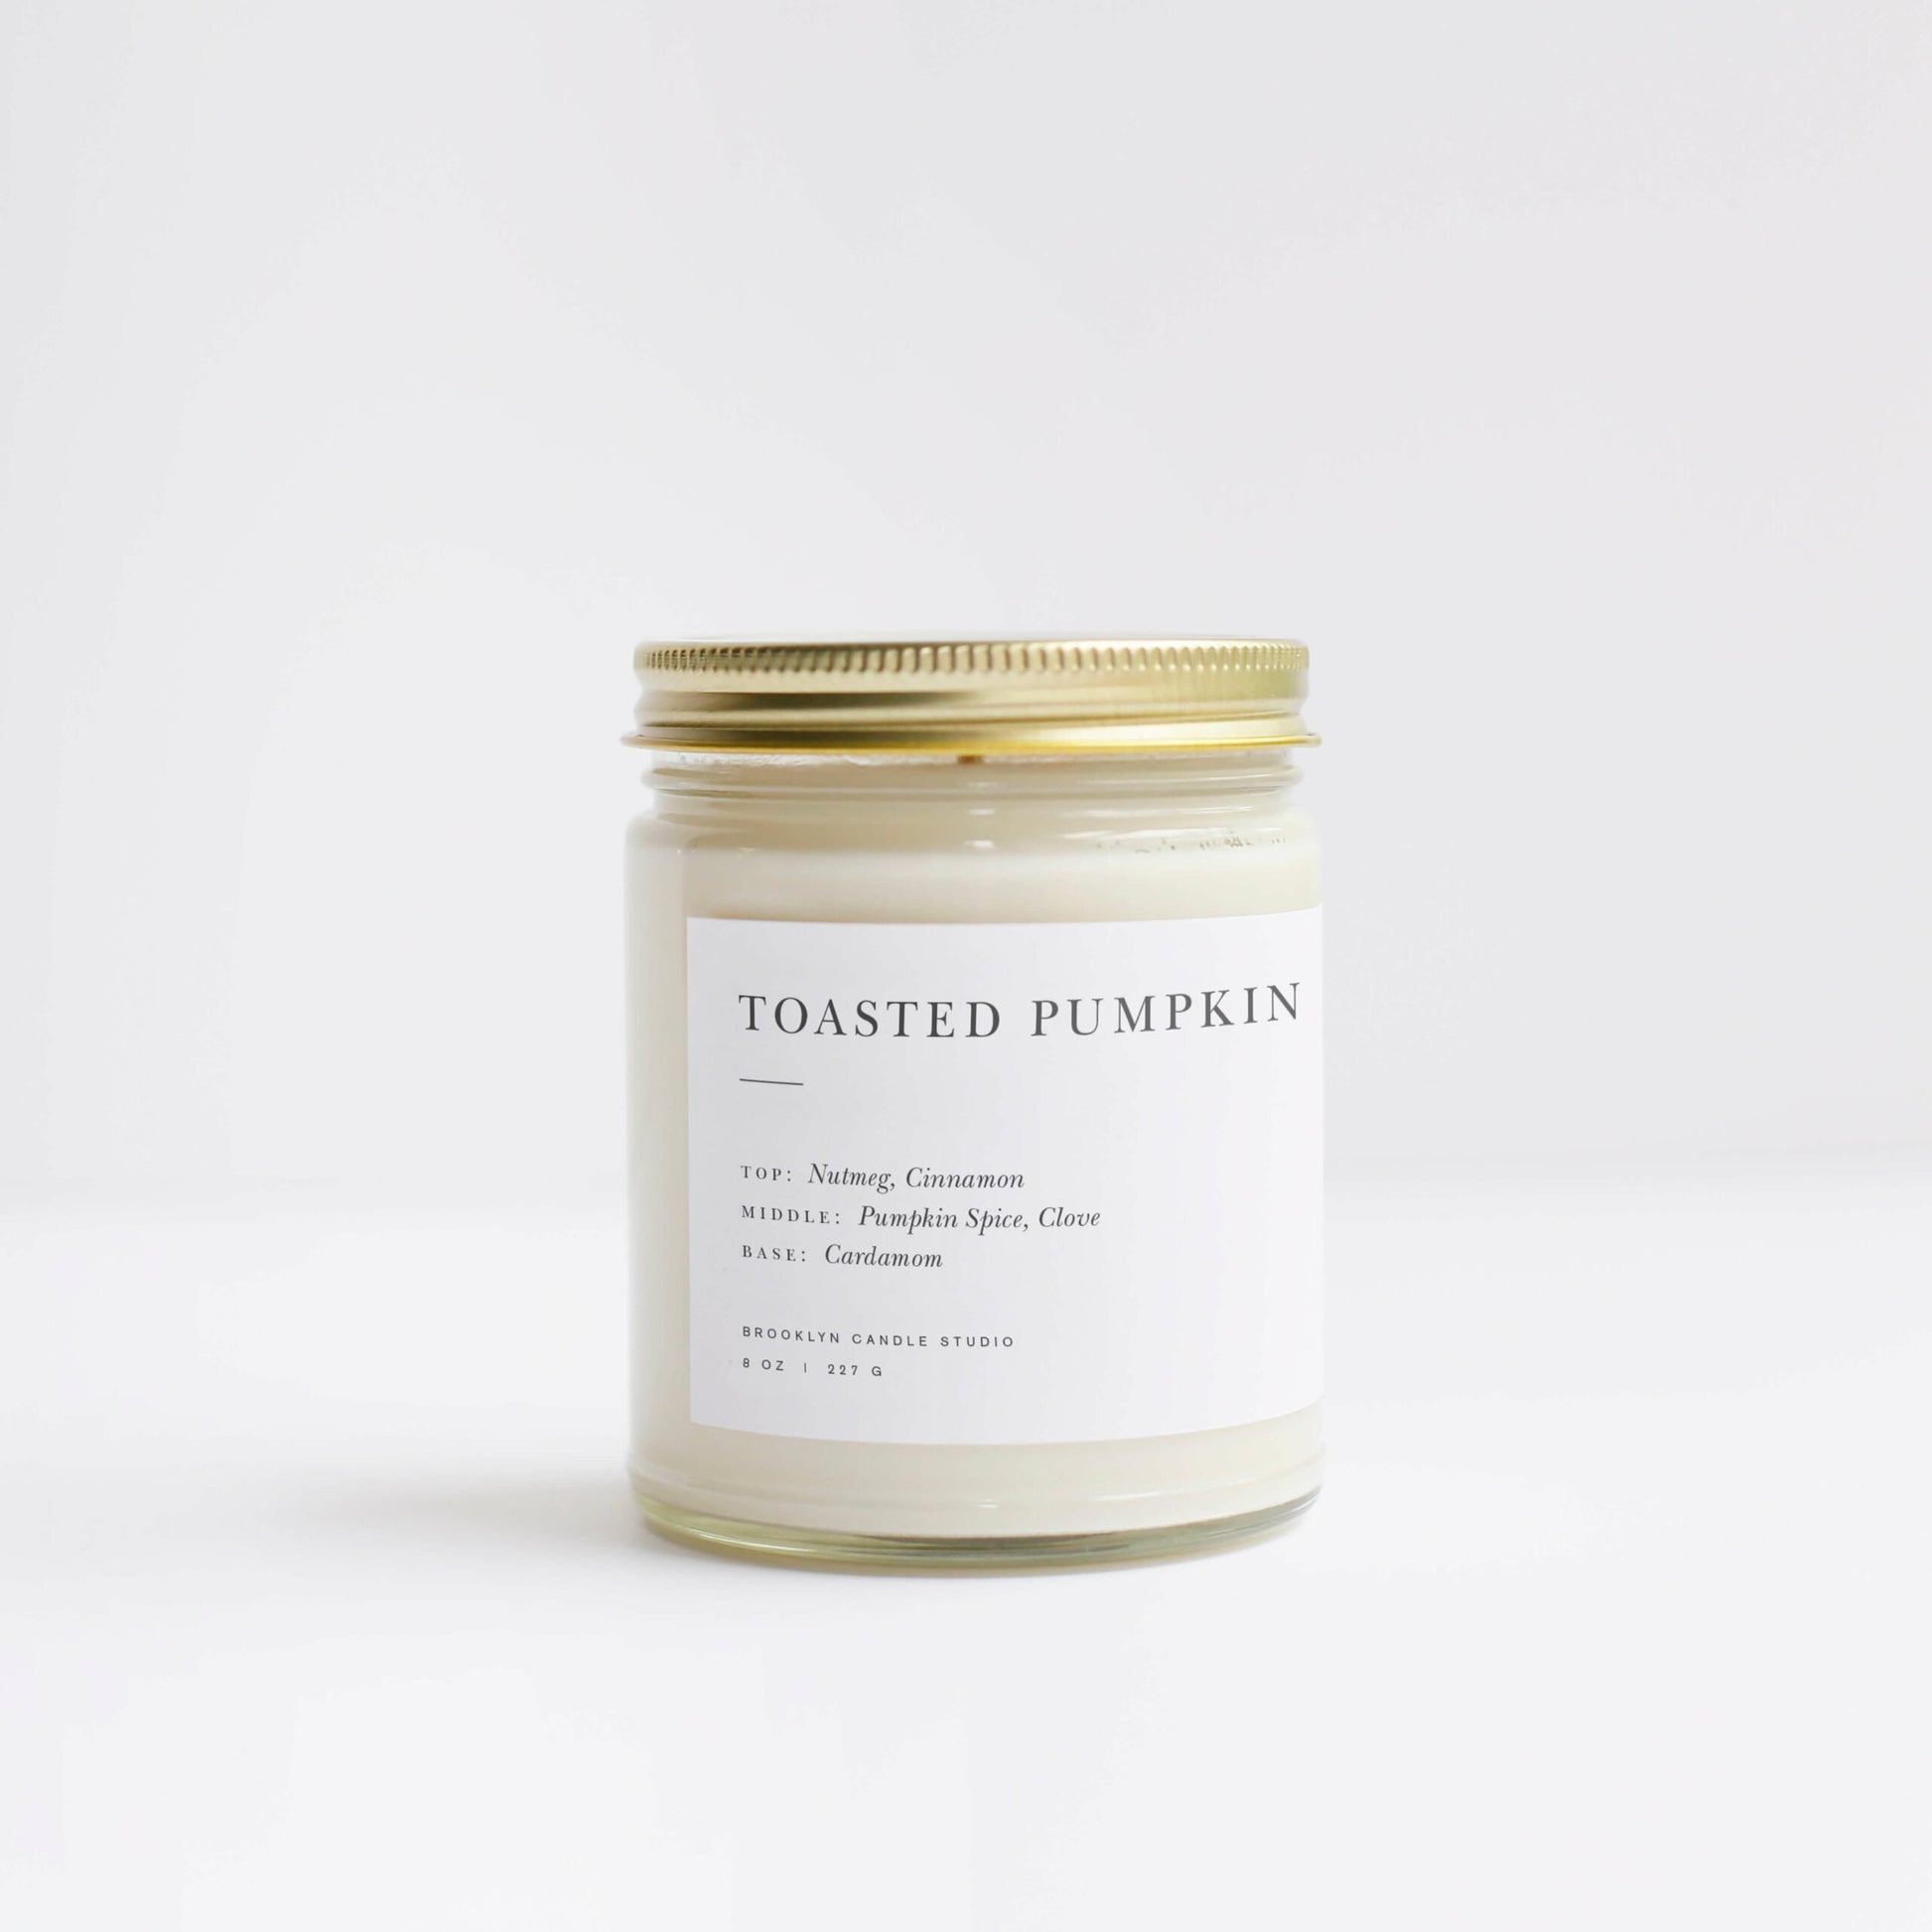 Toasted Pumpkin Candle by Brooklyn Candle Studio